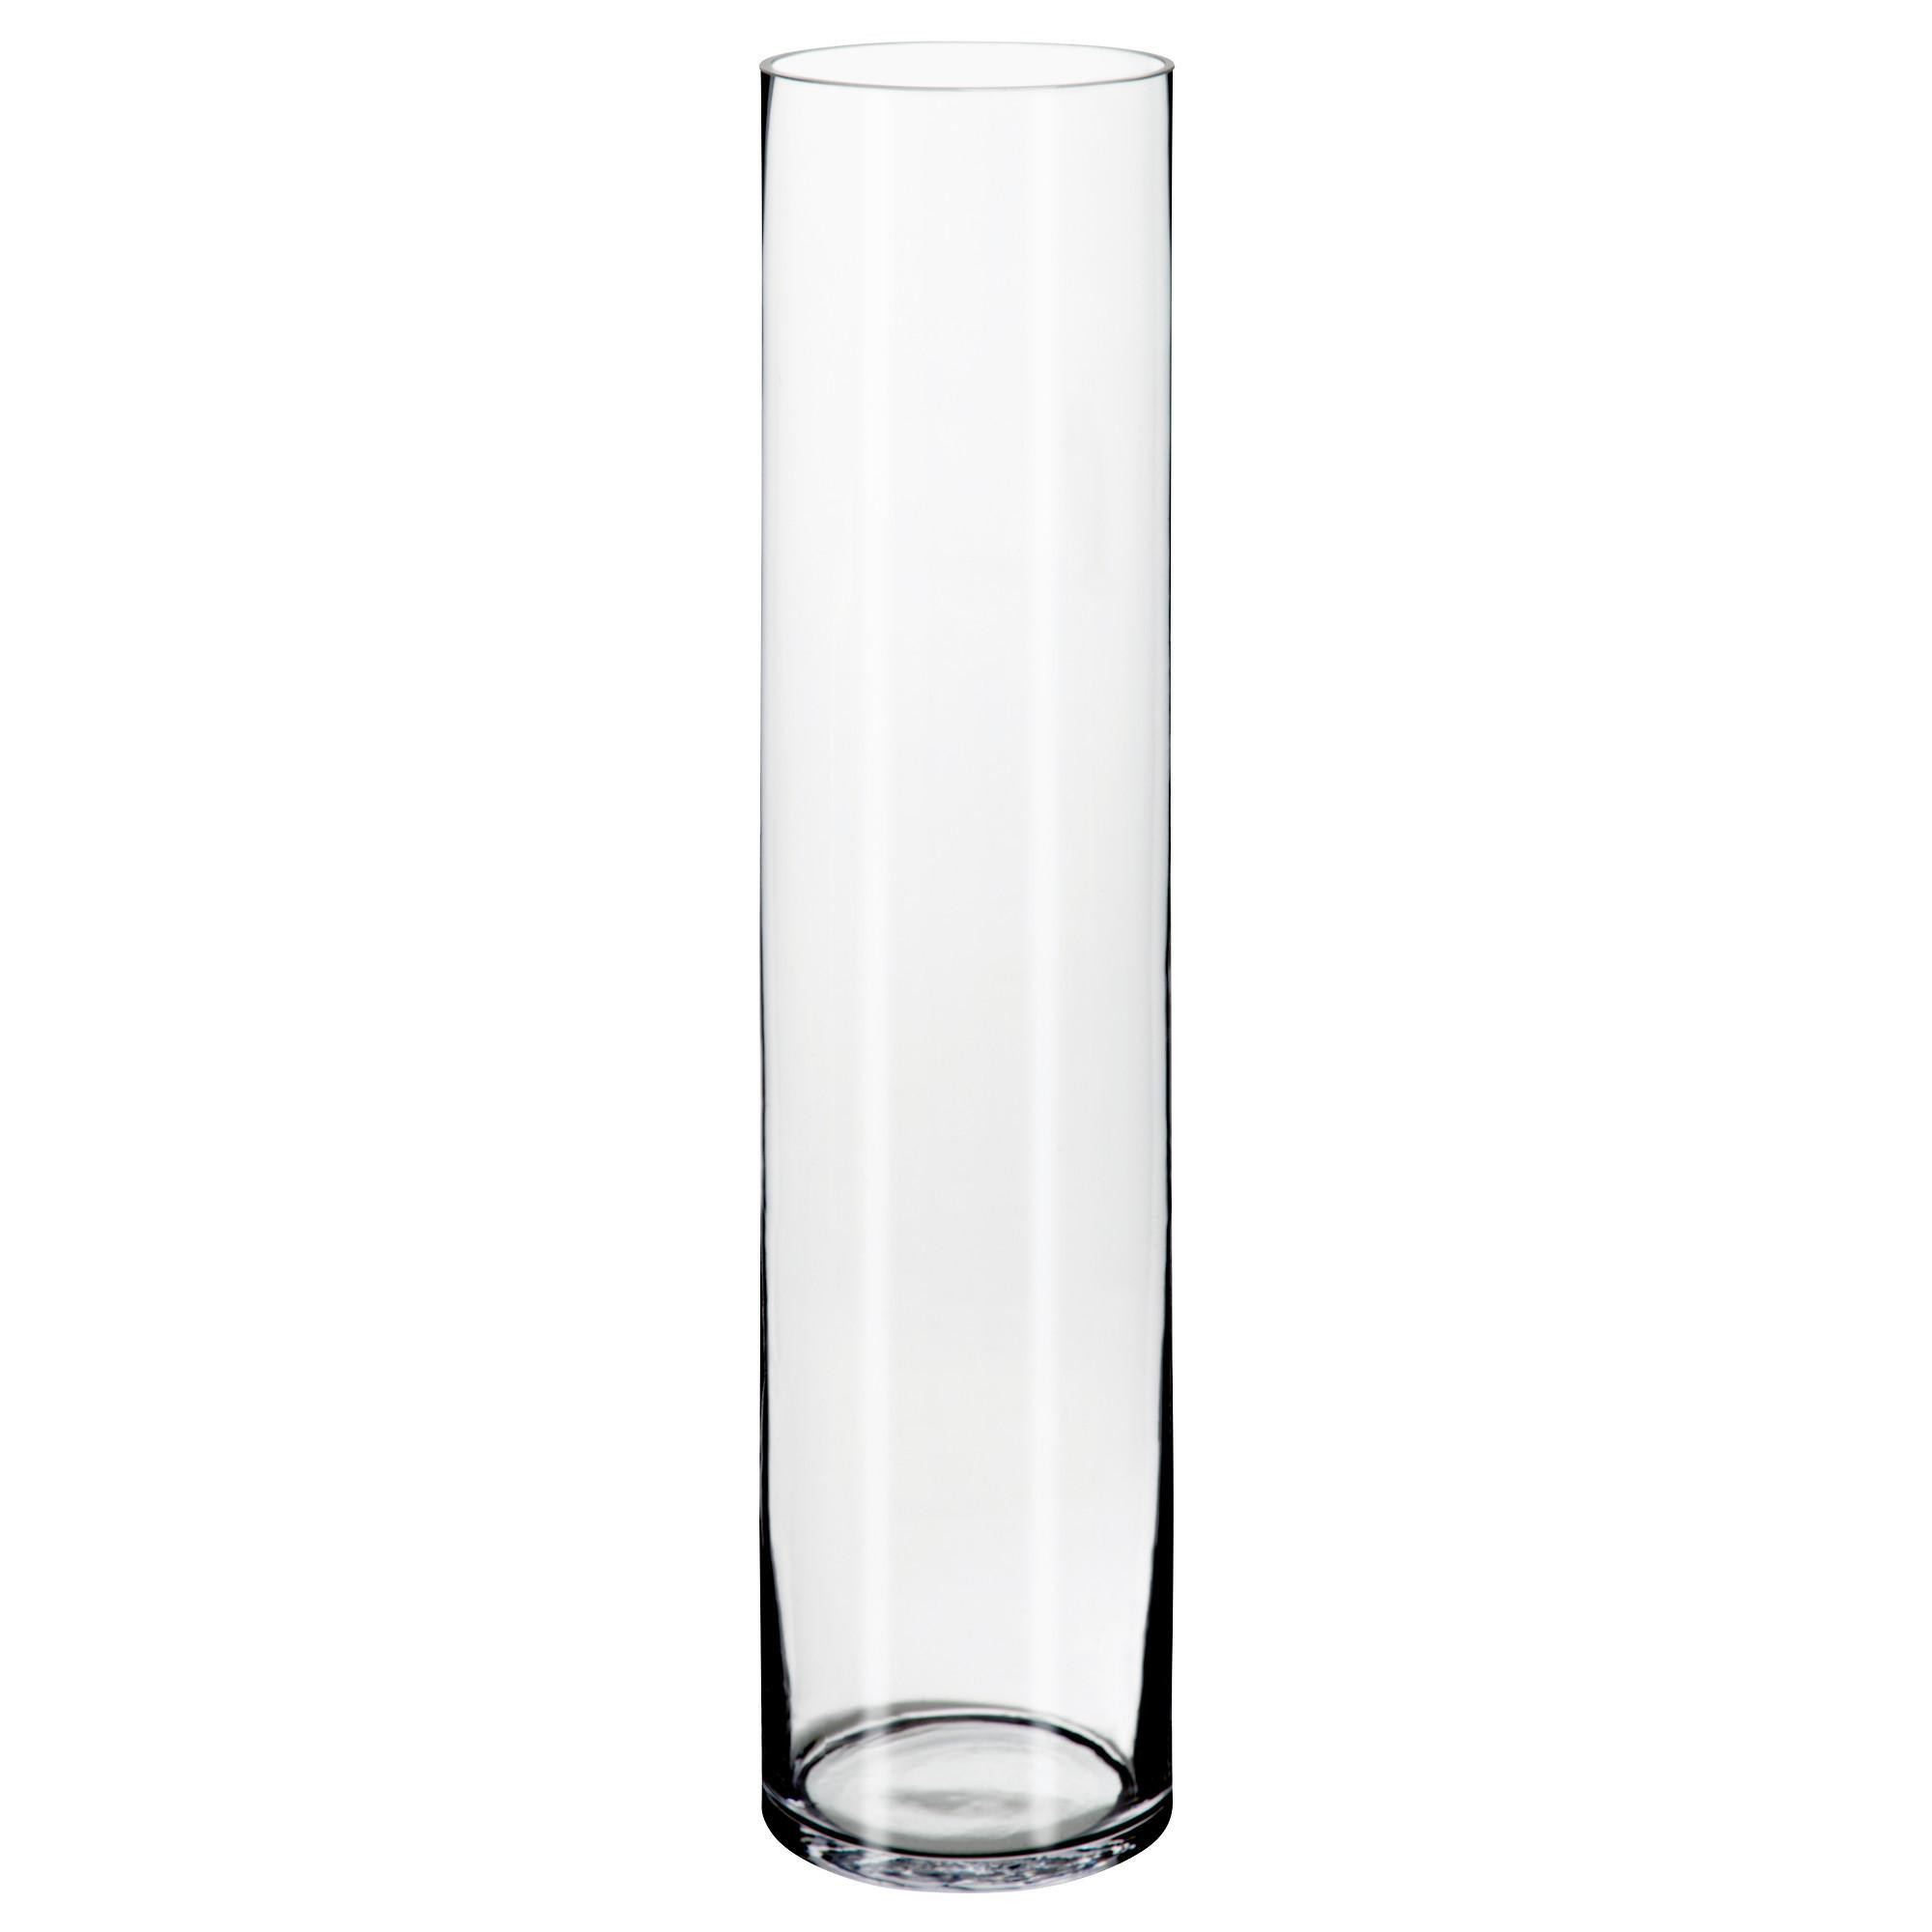 10 attractive Ikea Glass Floor Vase 2024 free download ikea glass floor vase of pics of floor vases ikea vases artificial plants collection pertaining to floor vases ikea images ikea white chair unique living room vase glass fresh pe s5h vases